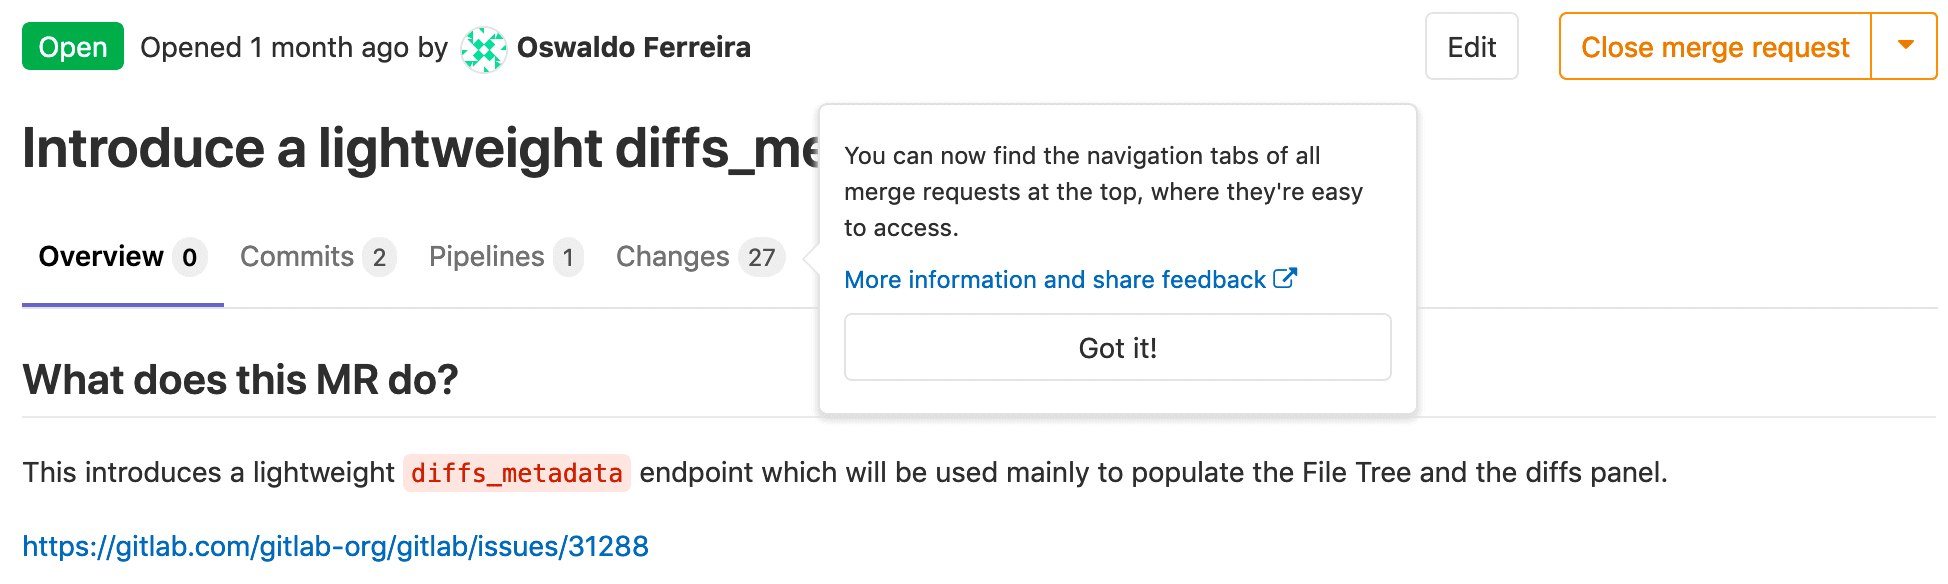 More easily navigate between tabs within Merge Requests